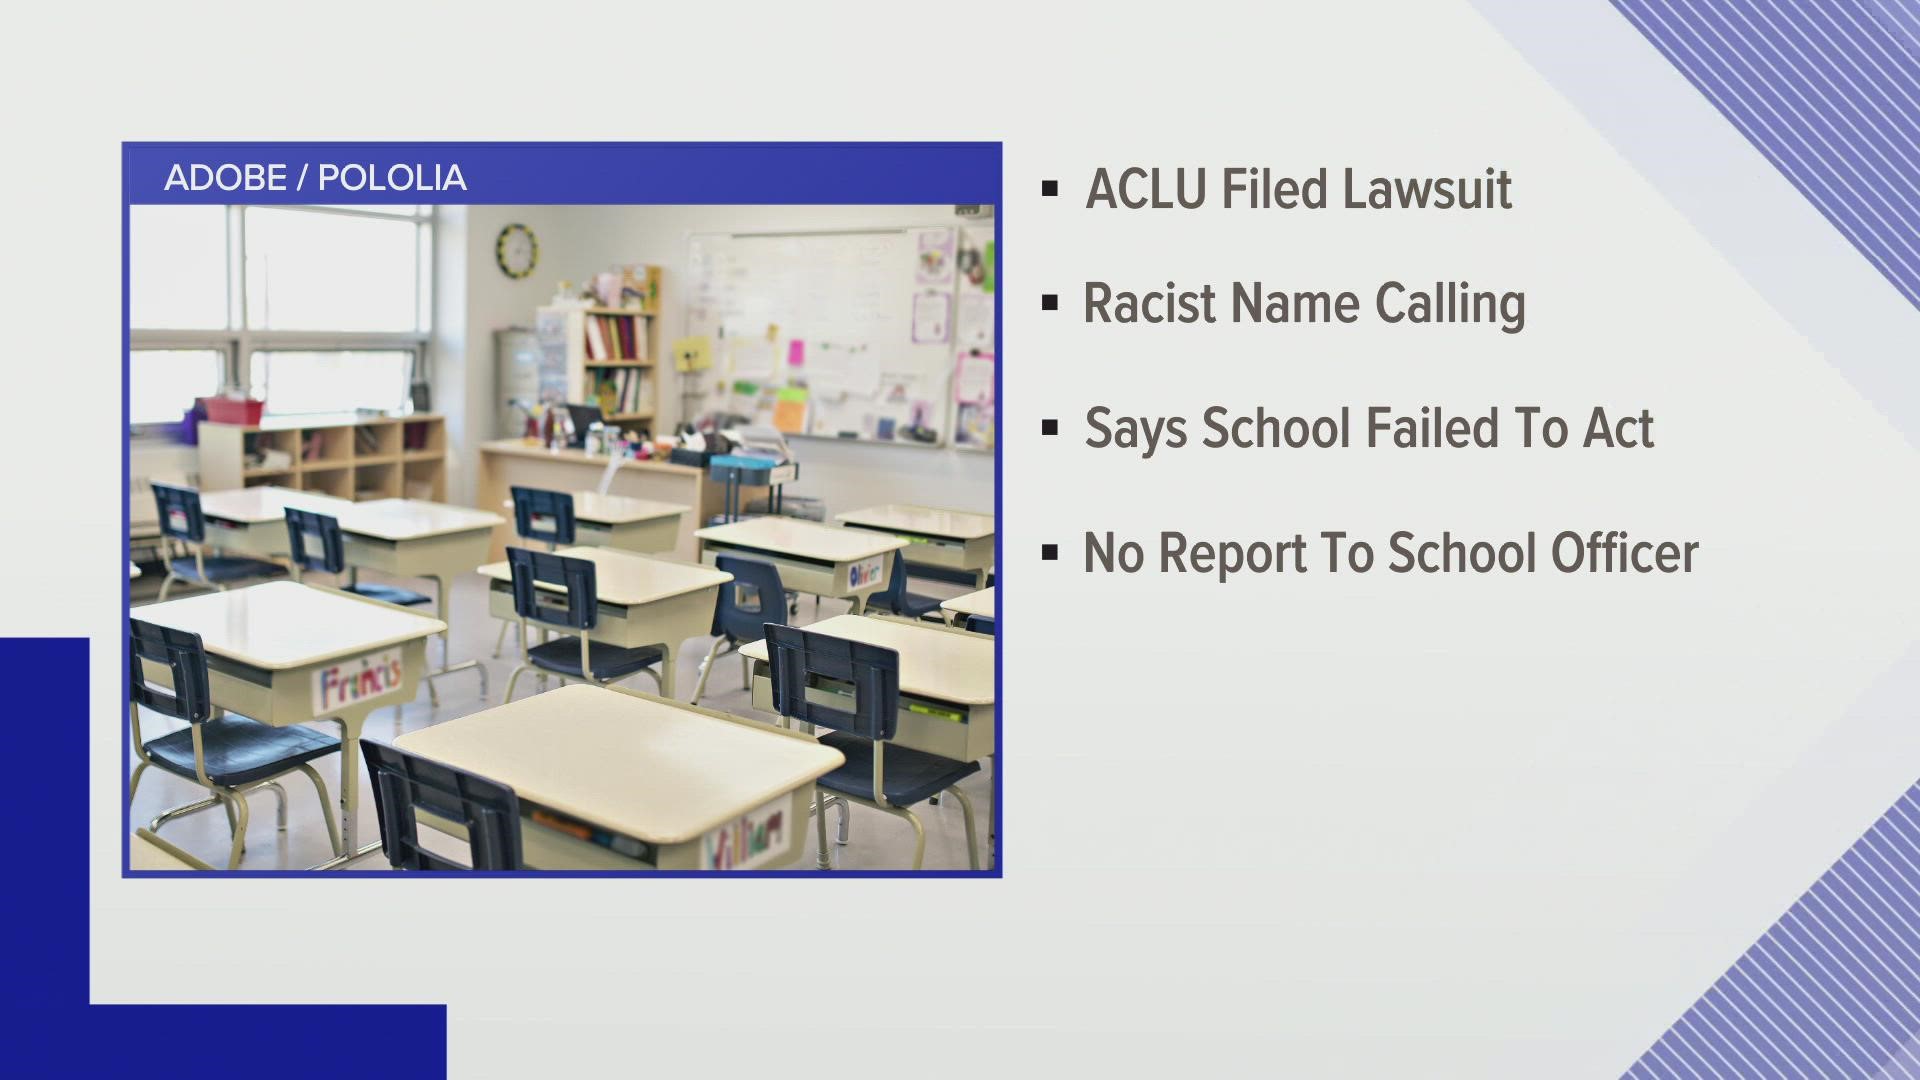 The ACLU filed a lawsuit against the Westfield Washington School Corp. on Thursday,